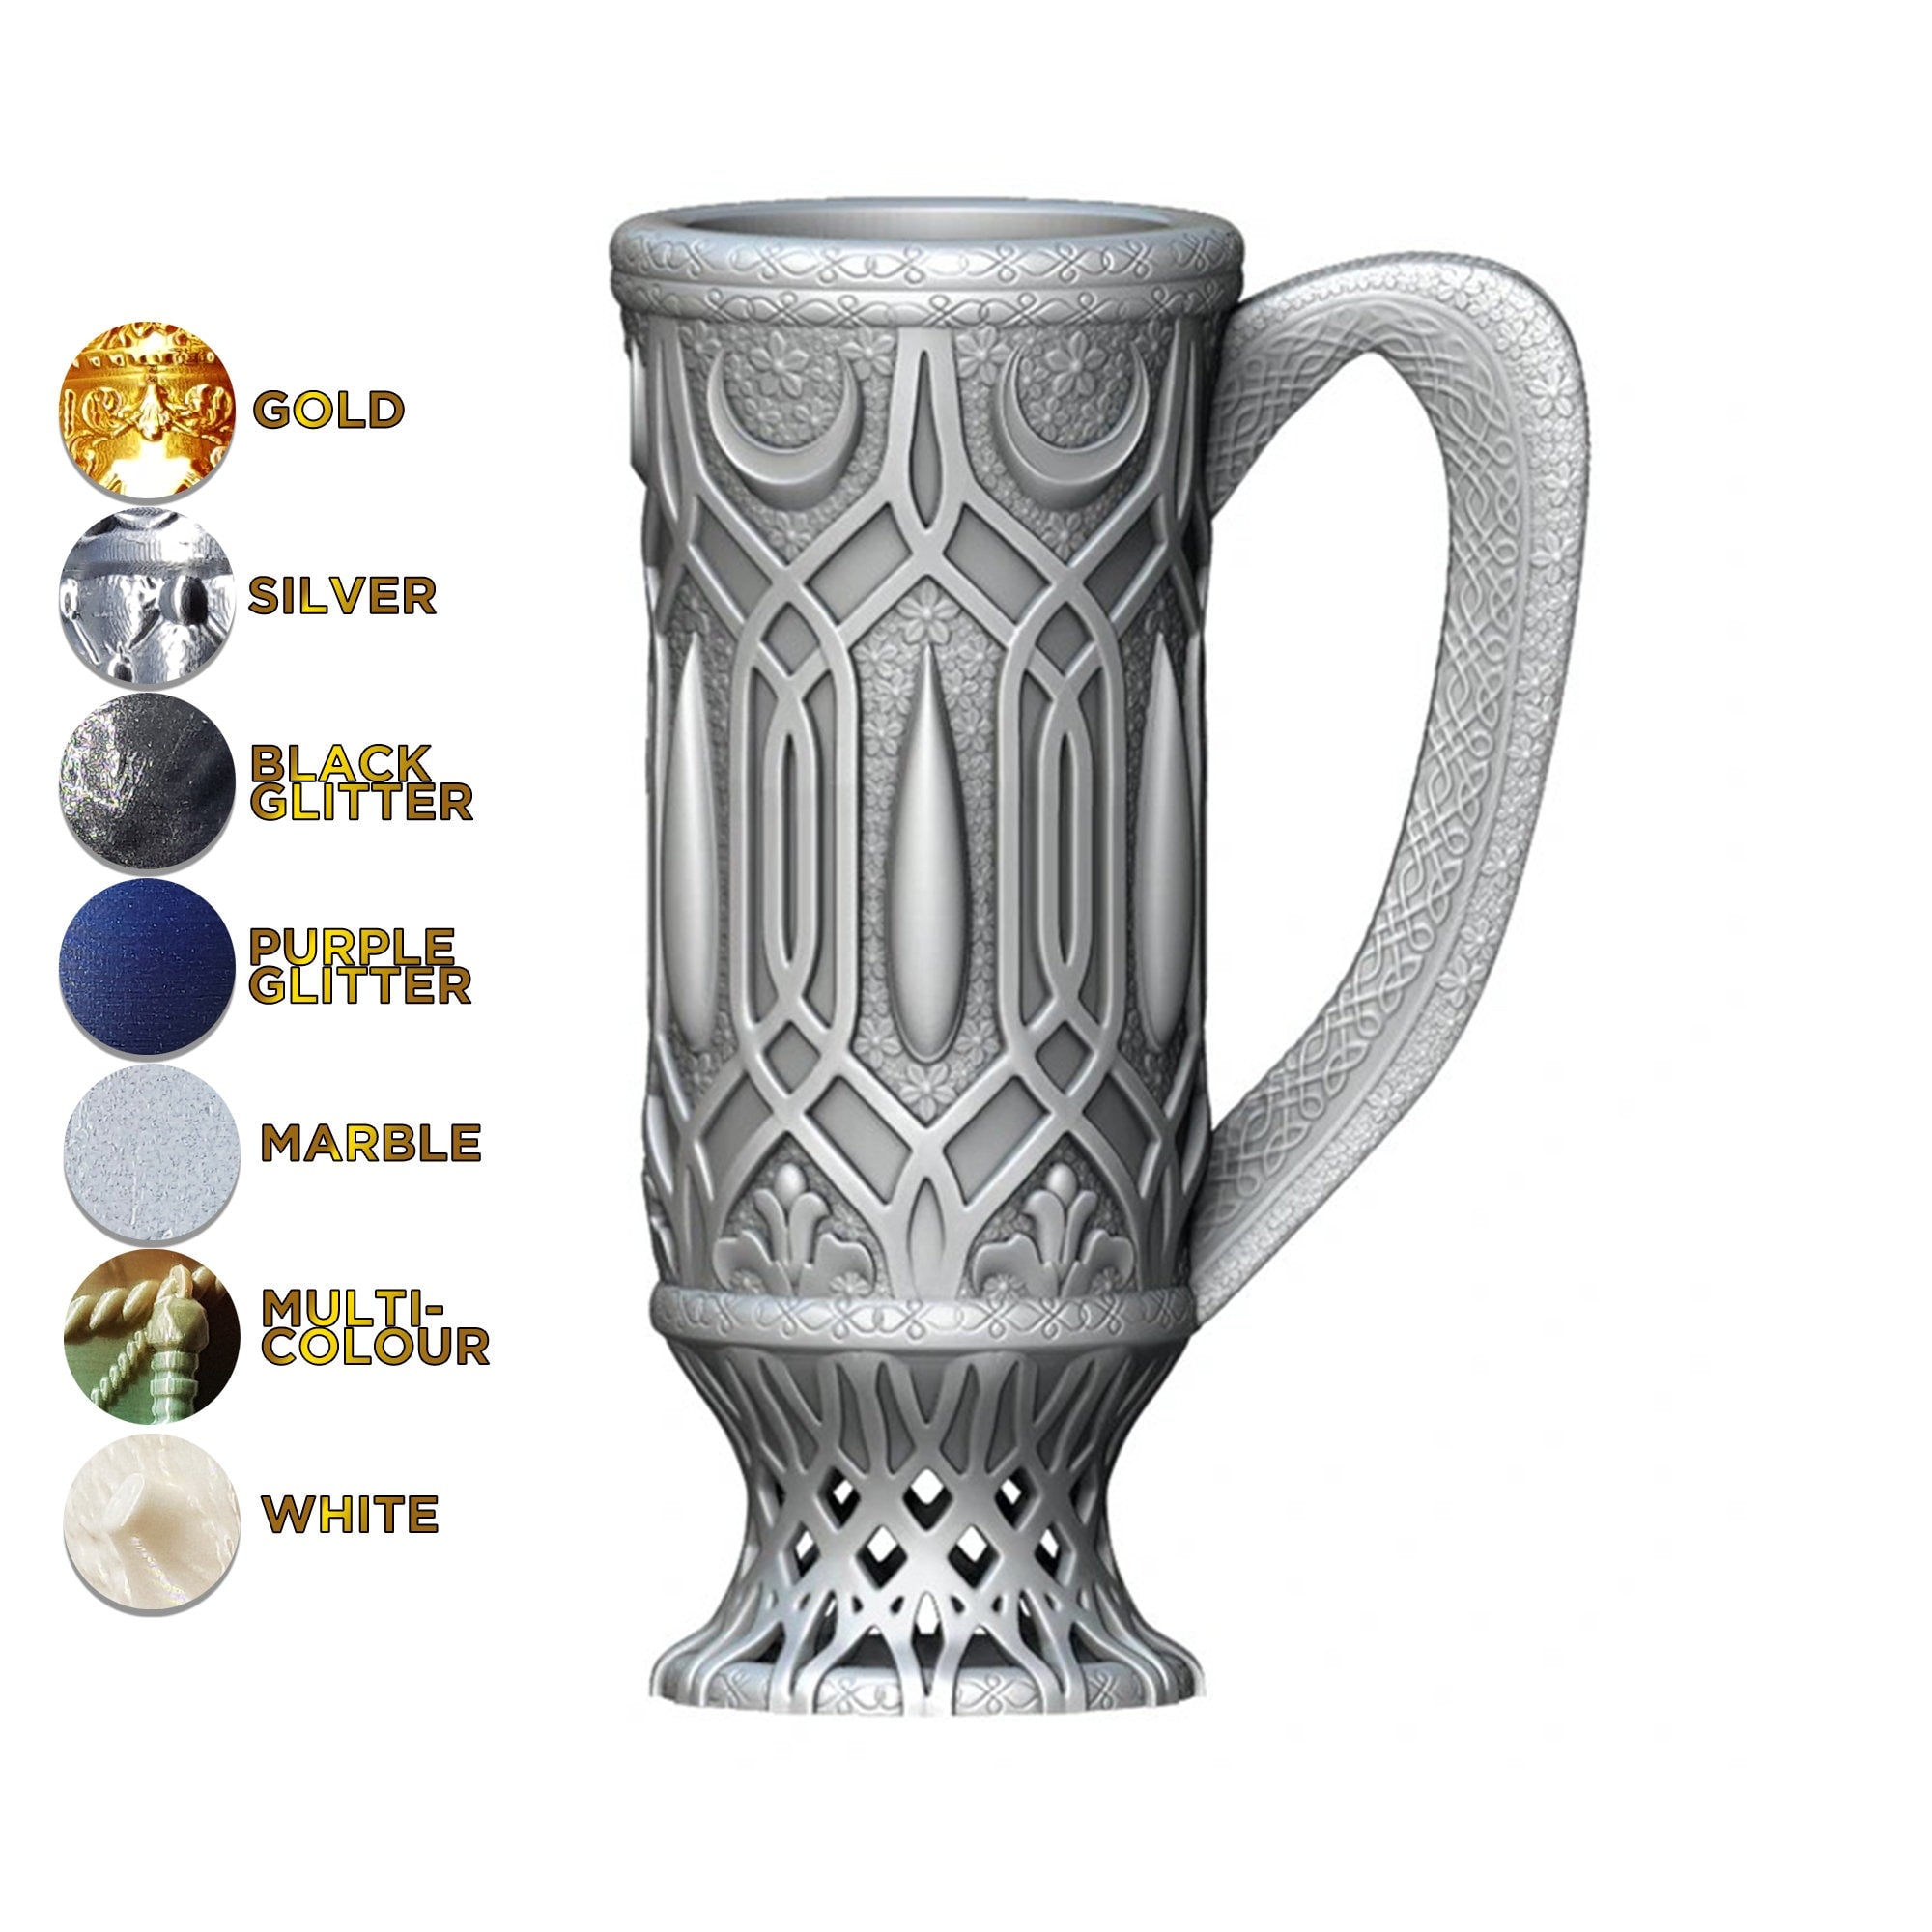 The ELF | Mythic Mug | Larp | Gaming Zubehör | Tabletop | Dice Cup | Box | Holder-Role Playing Games